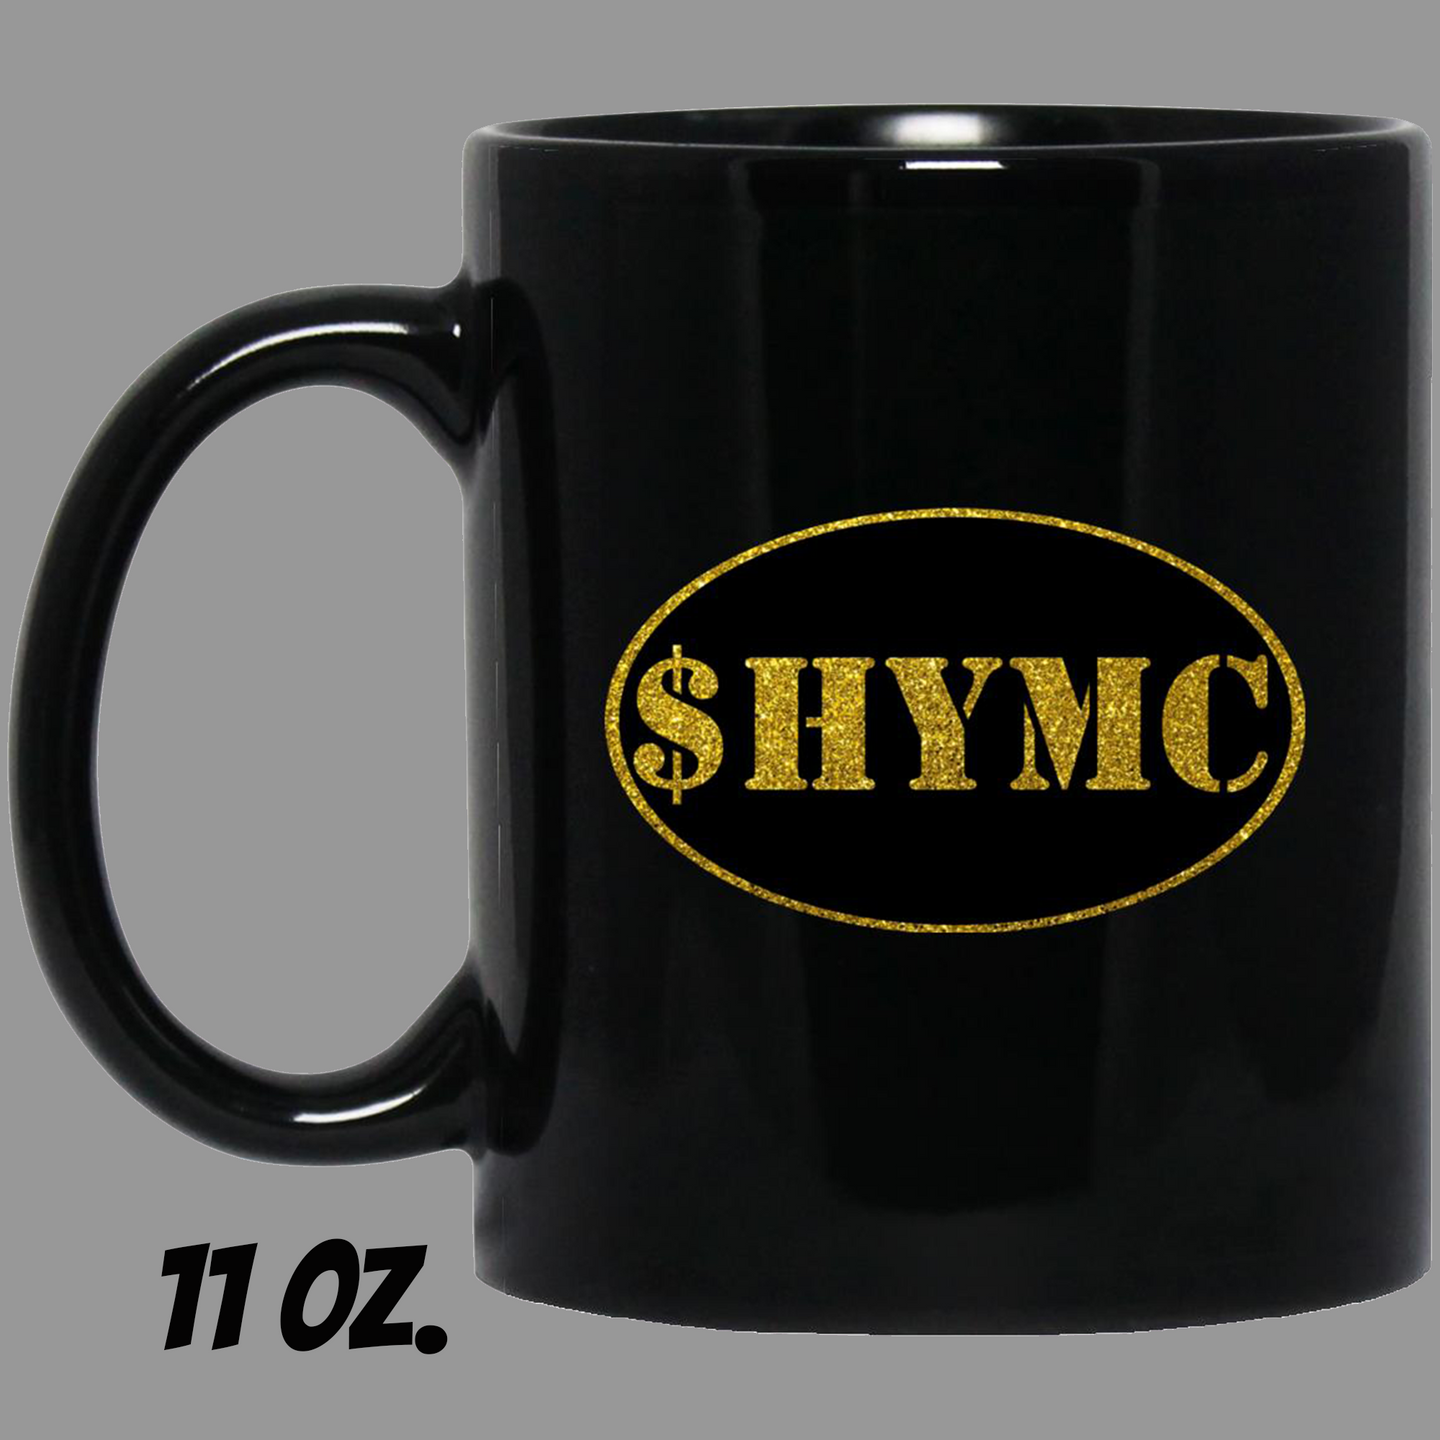 $HYMC - Cups Mugs Black, White & Color-Changing